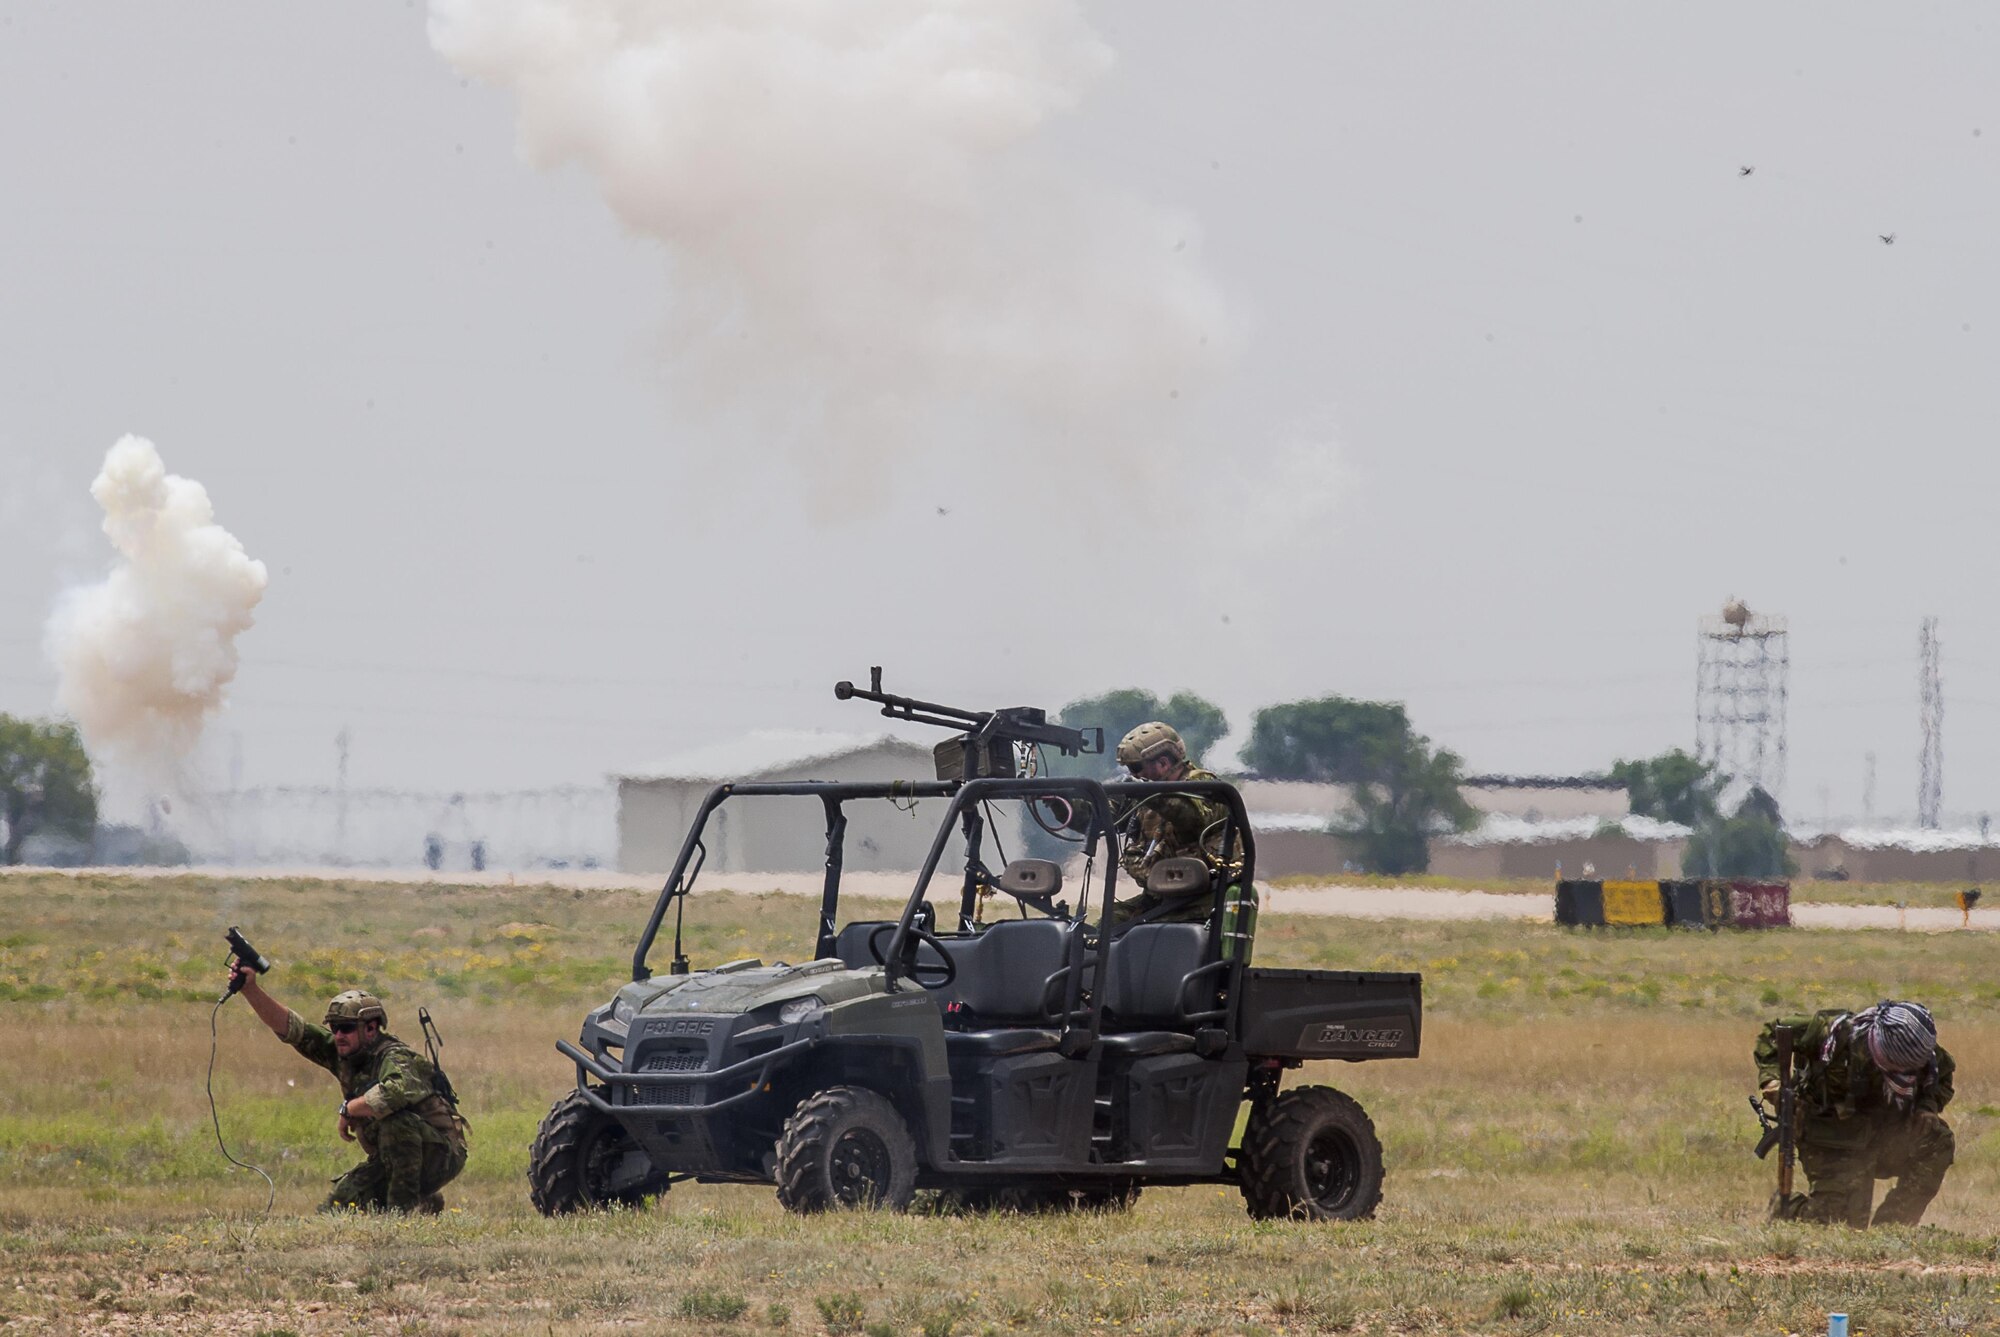 Members of the 27th Special Operations Security Forces Squadron participate in a capabilities demonstration during the Cannon Air Show on May 29, 2016, at Cannon Air Force Base, N.M. The 2016 Cannon Air Show highlights the unique capabilities and qualities of Cannon's air commandos and also celebrates the long-standing relationship between the 27th Special Operations Wing and the local community.  (U.S. Air Force photo/Master Sgt. Dennis J. Henry Jr.)